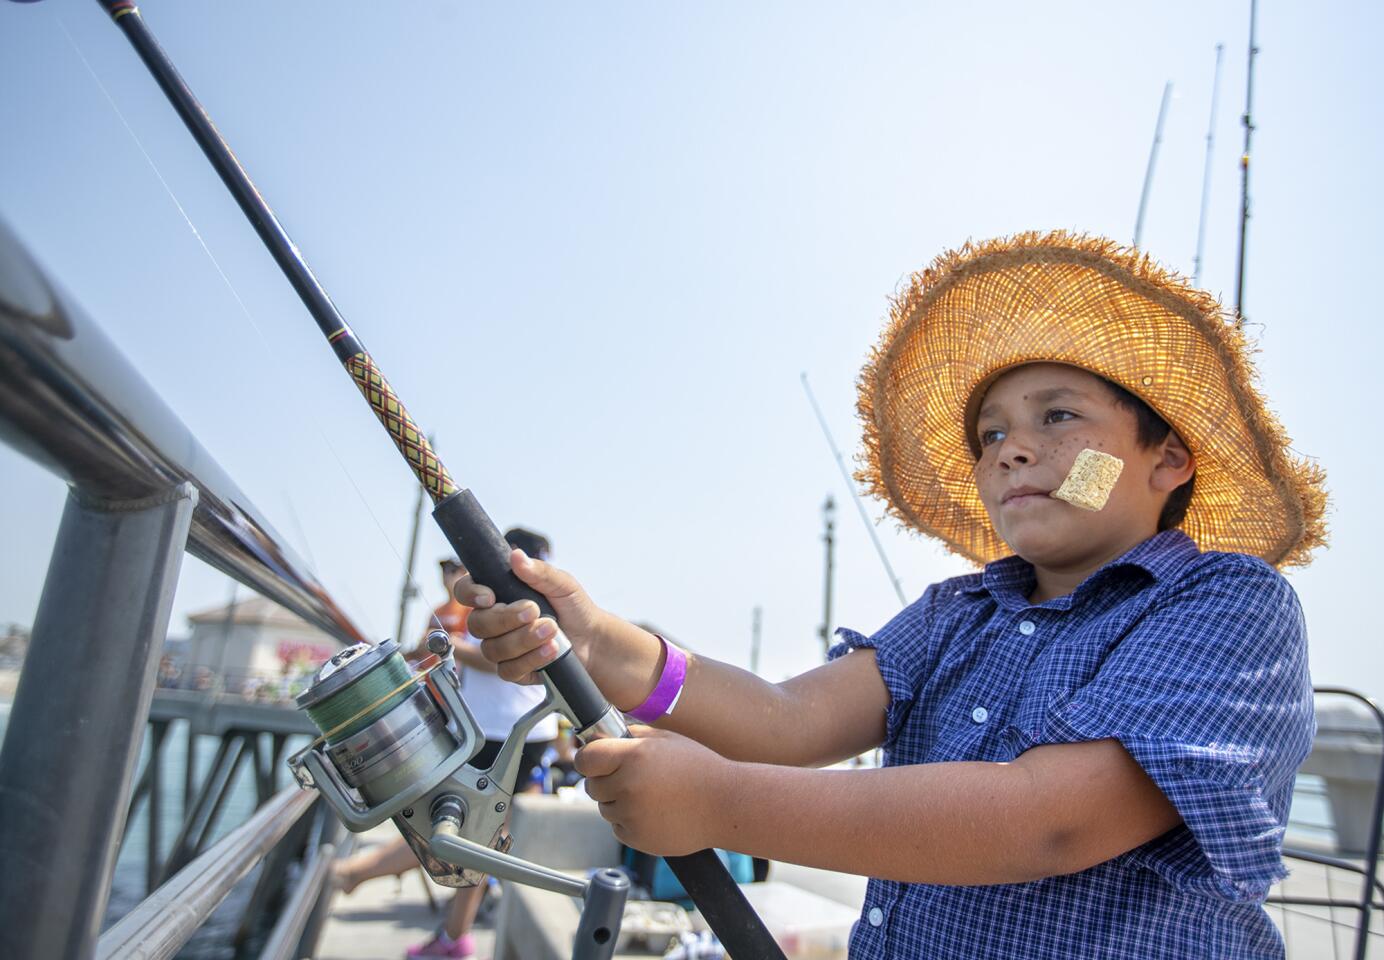 Elijah Rothert, 8, fishes from the Huntington Beach Pier during the 55th annual Huck Finn Fishing Derby on Saturday, August 11.